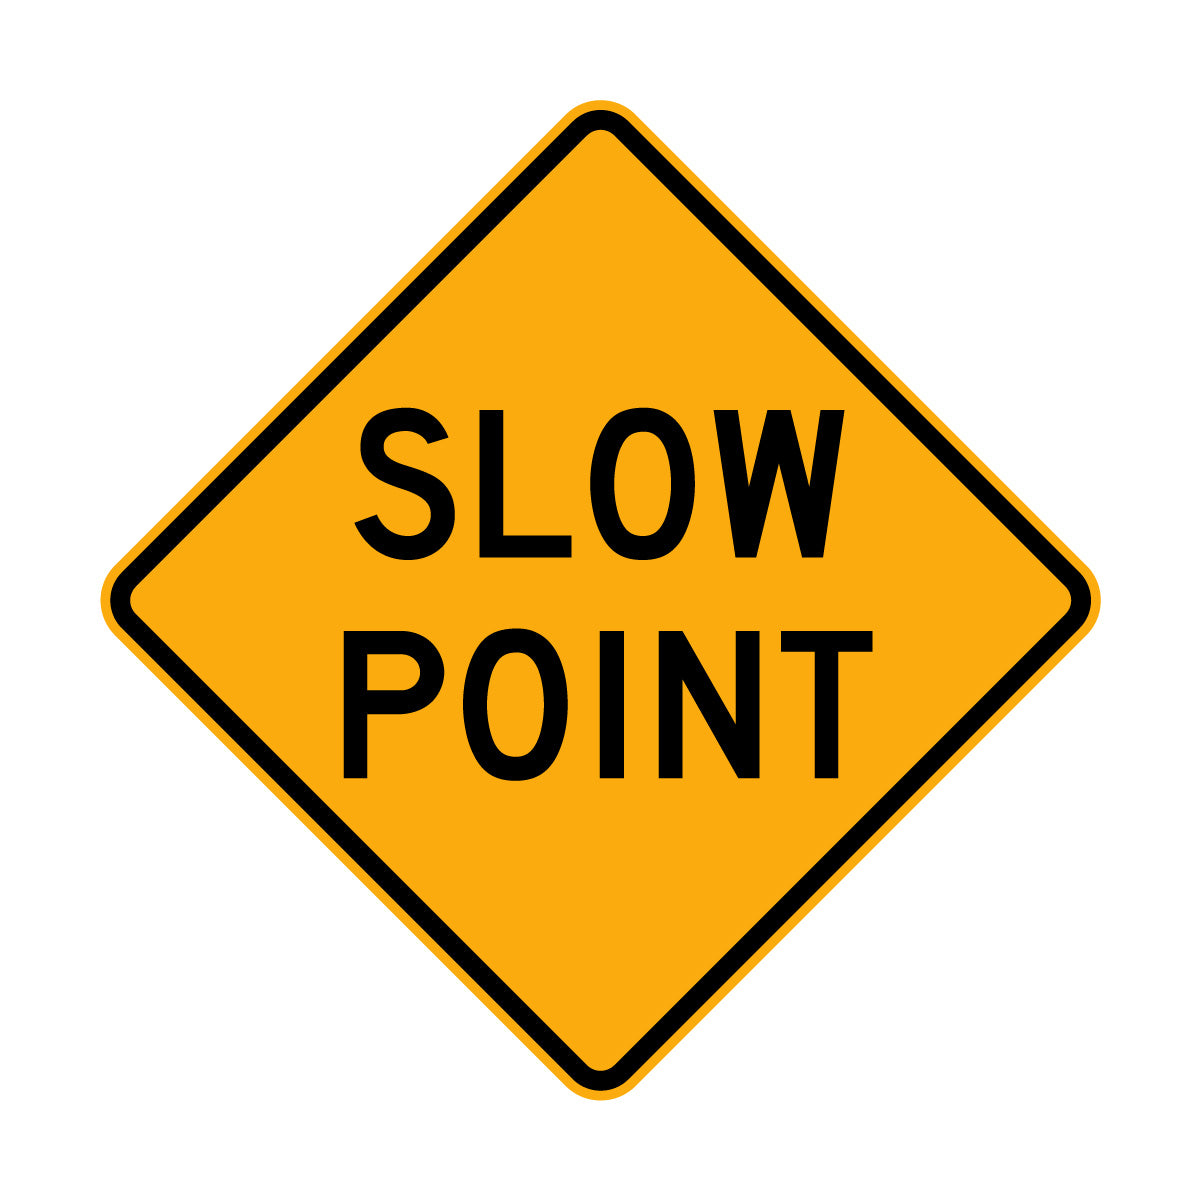 Warning: Slow Point Sign